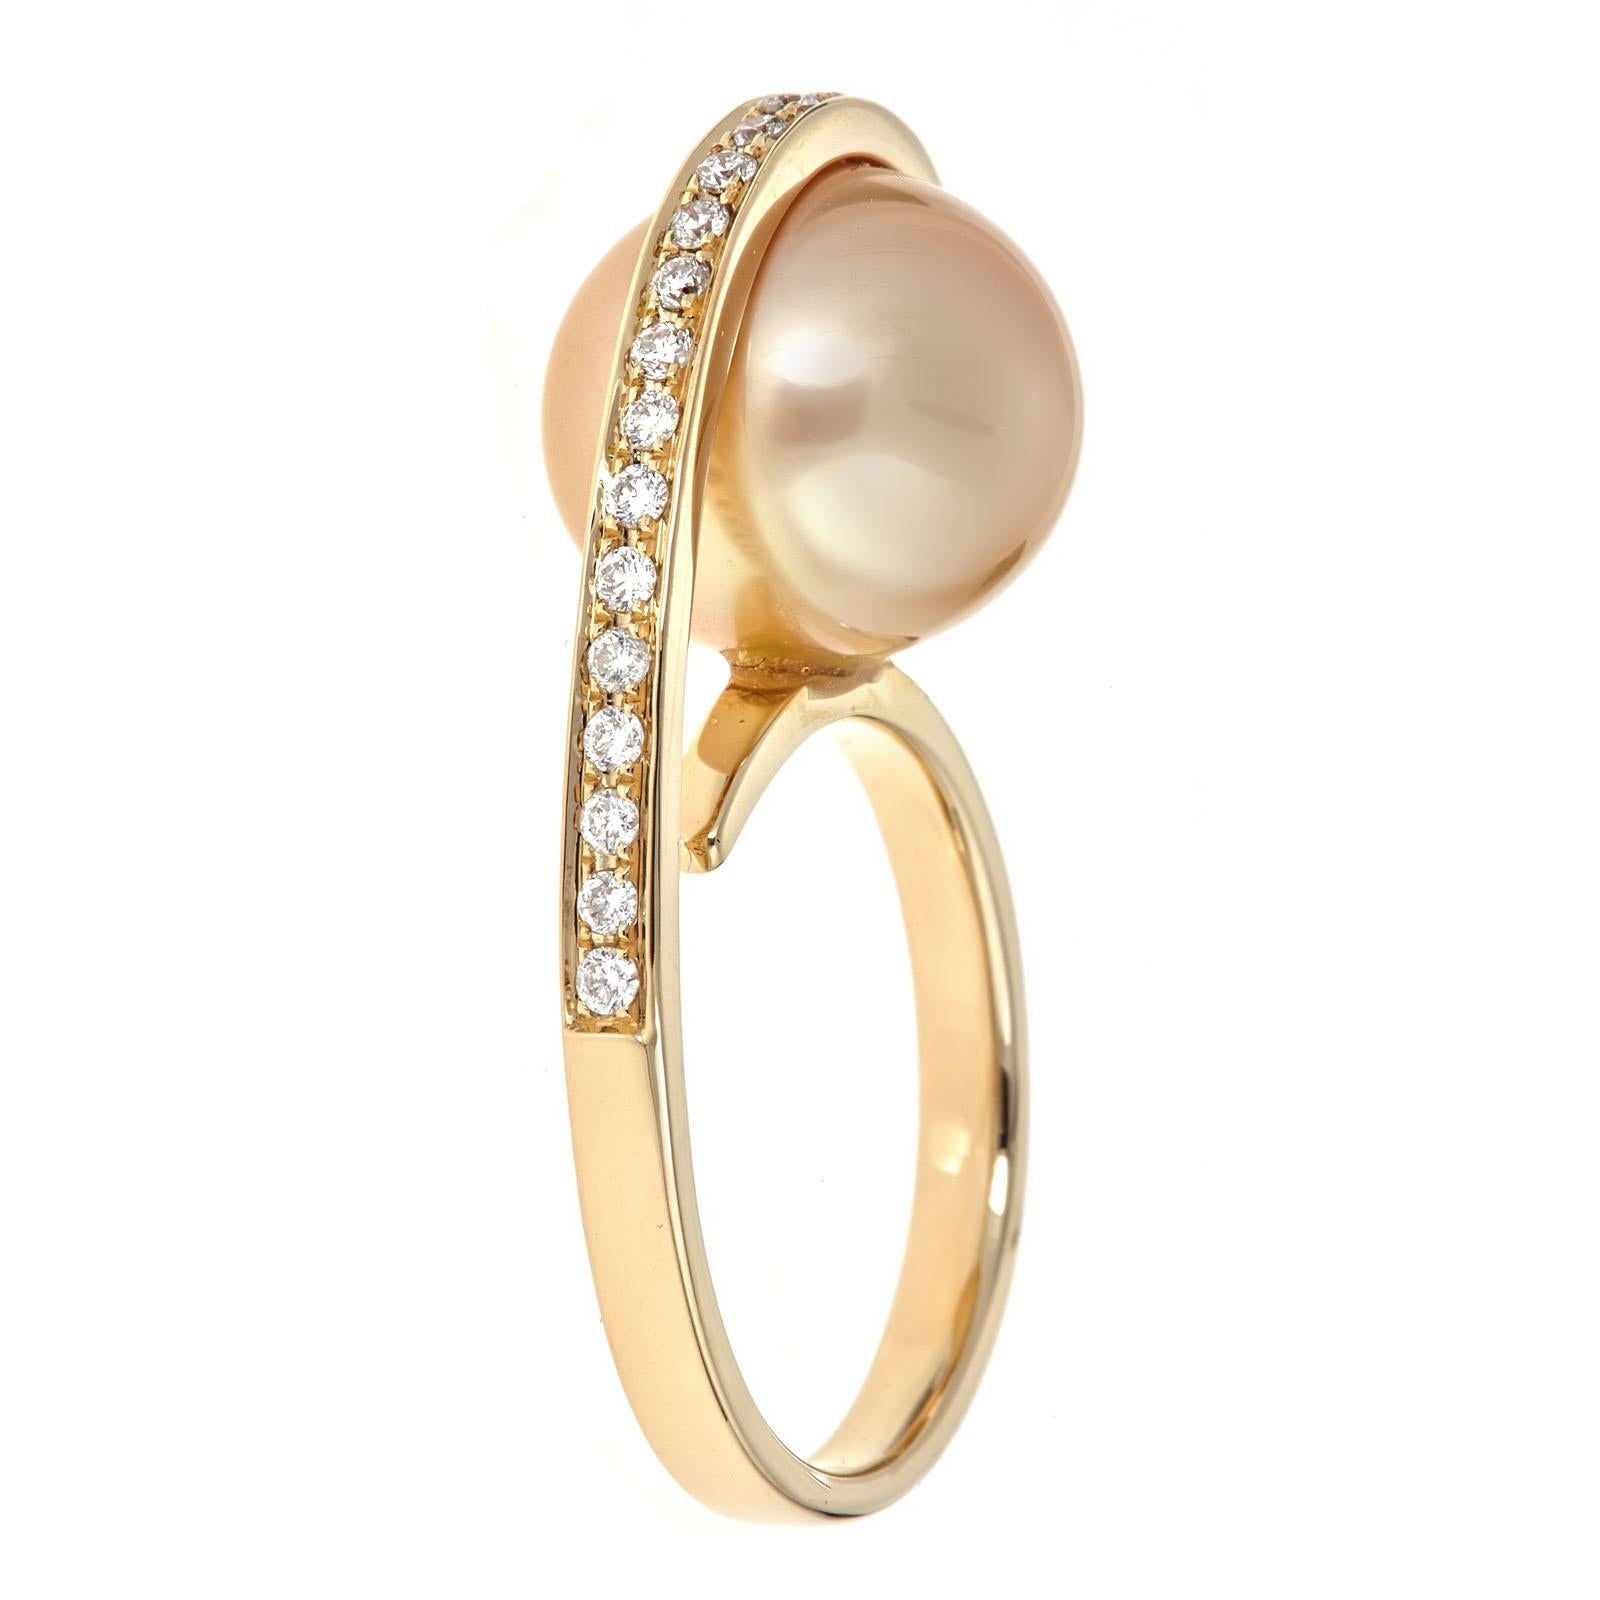 This beautiful Pearl Ring is crafted in 18-karat Rose gold and features a 11.90 carat 1 Pc Of  South Sea Pearl and 20 Pcs Round White Diamonds in GH- I1 quality with 0.28 Ct in a prong-setting. This Ring comes in sizes 7, and it is a perfect gift